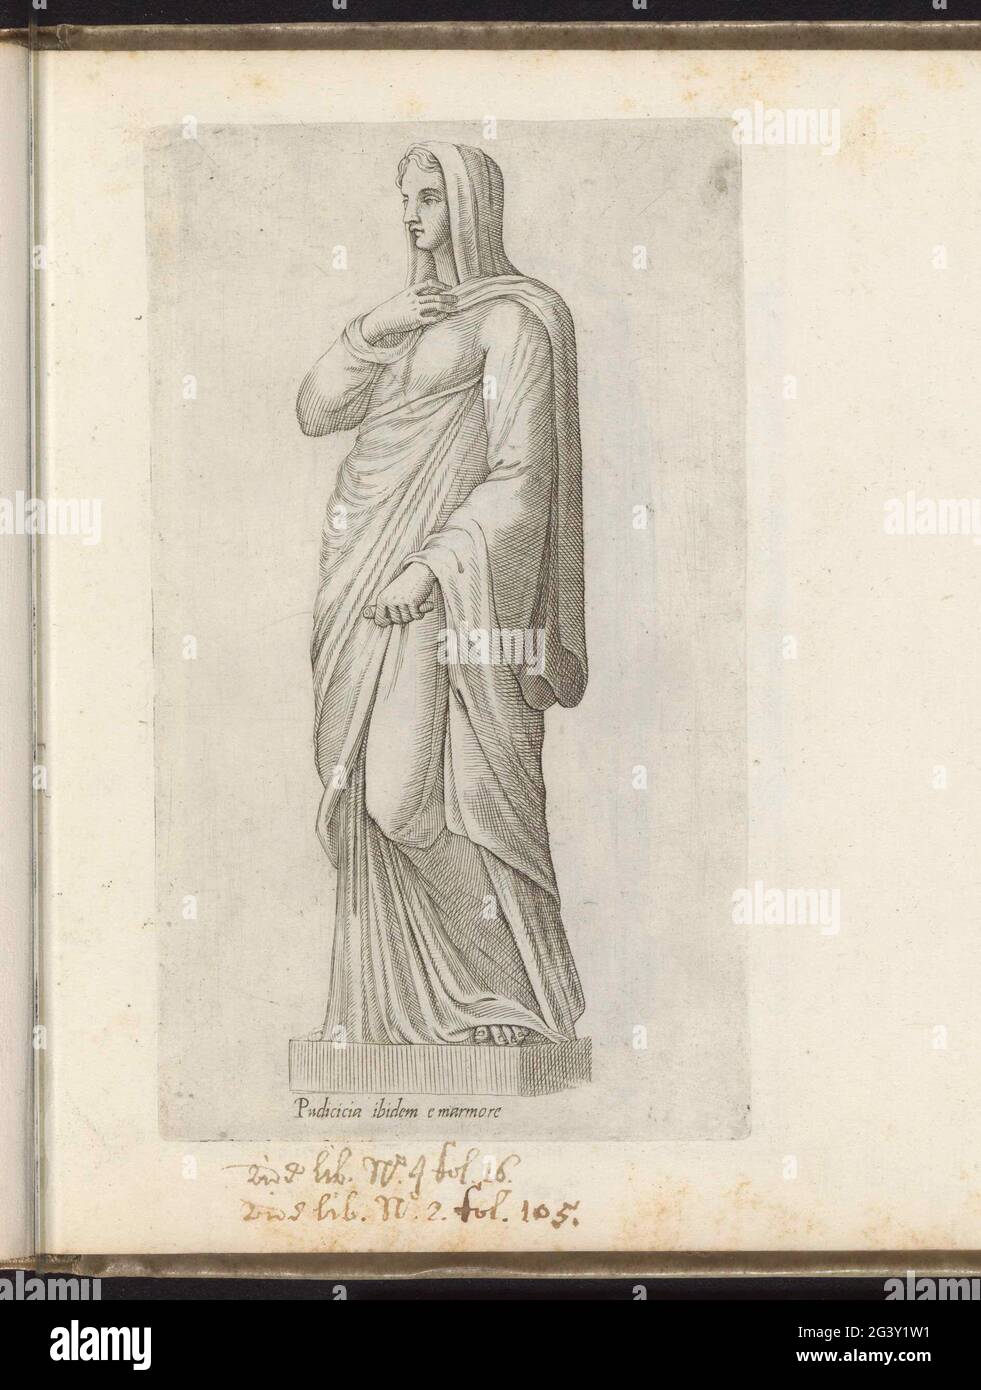 Sculpture of pudicitia; Sculptures from ancient times. Caption in Latin. Print is part of an album. Stock Photo